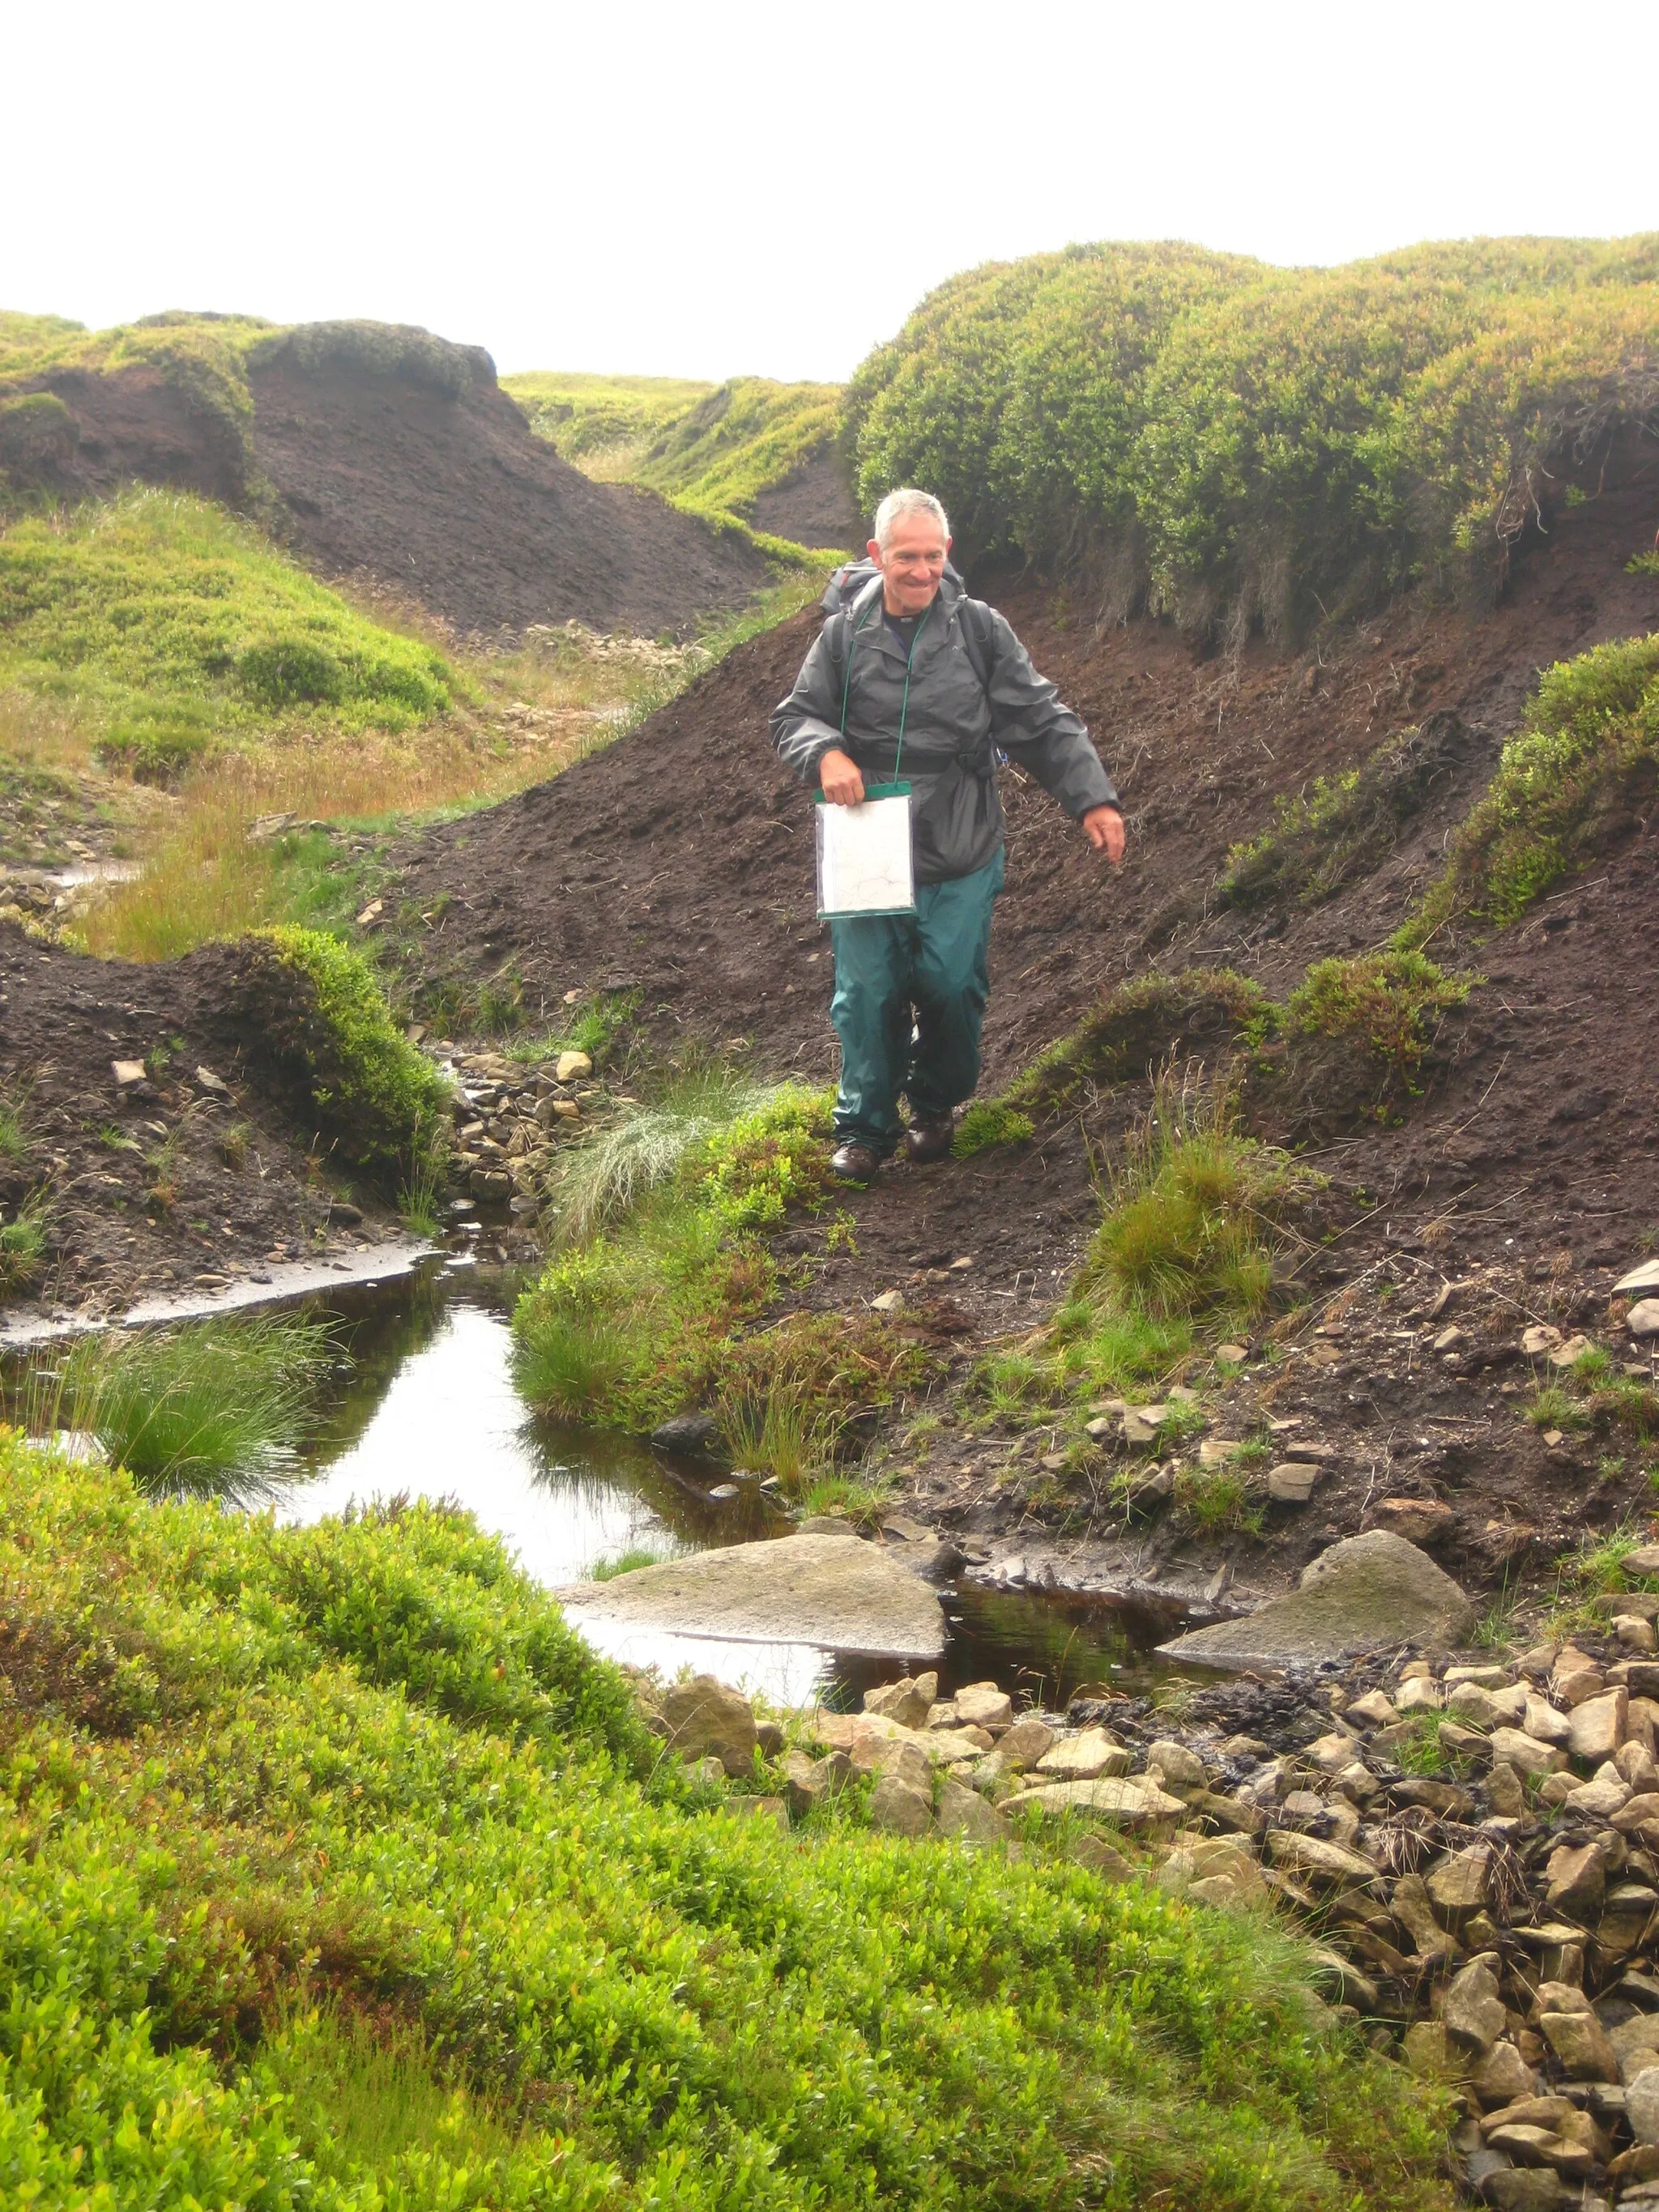 Photo showing: Descending eroded peat gully on east flank of Bleaklow. This image demonstrates the depth of peat on Bleaklow, as well as recent efforts at gullly-blocking and damming to re-wet and restore the moorland habitat. Picture taken whilst walking the Derwent Watershed Route.